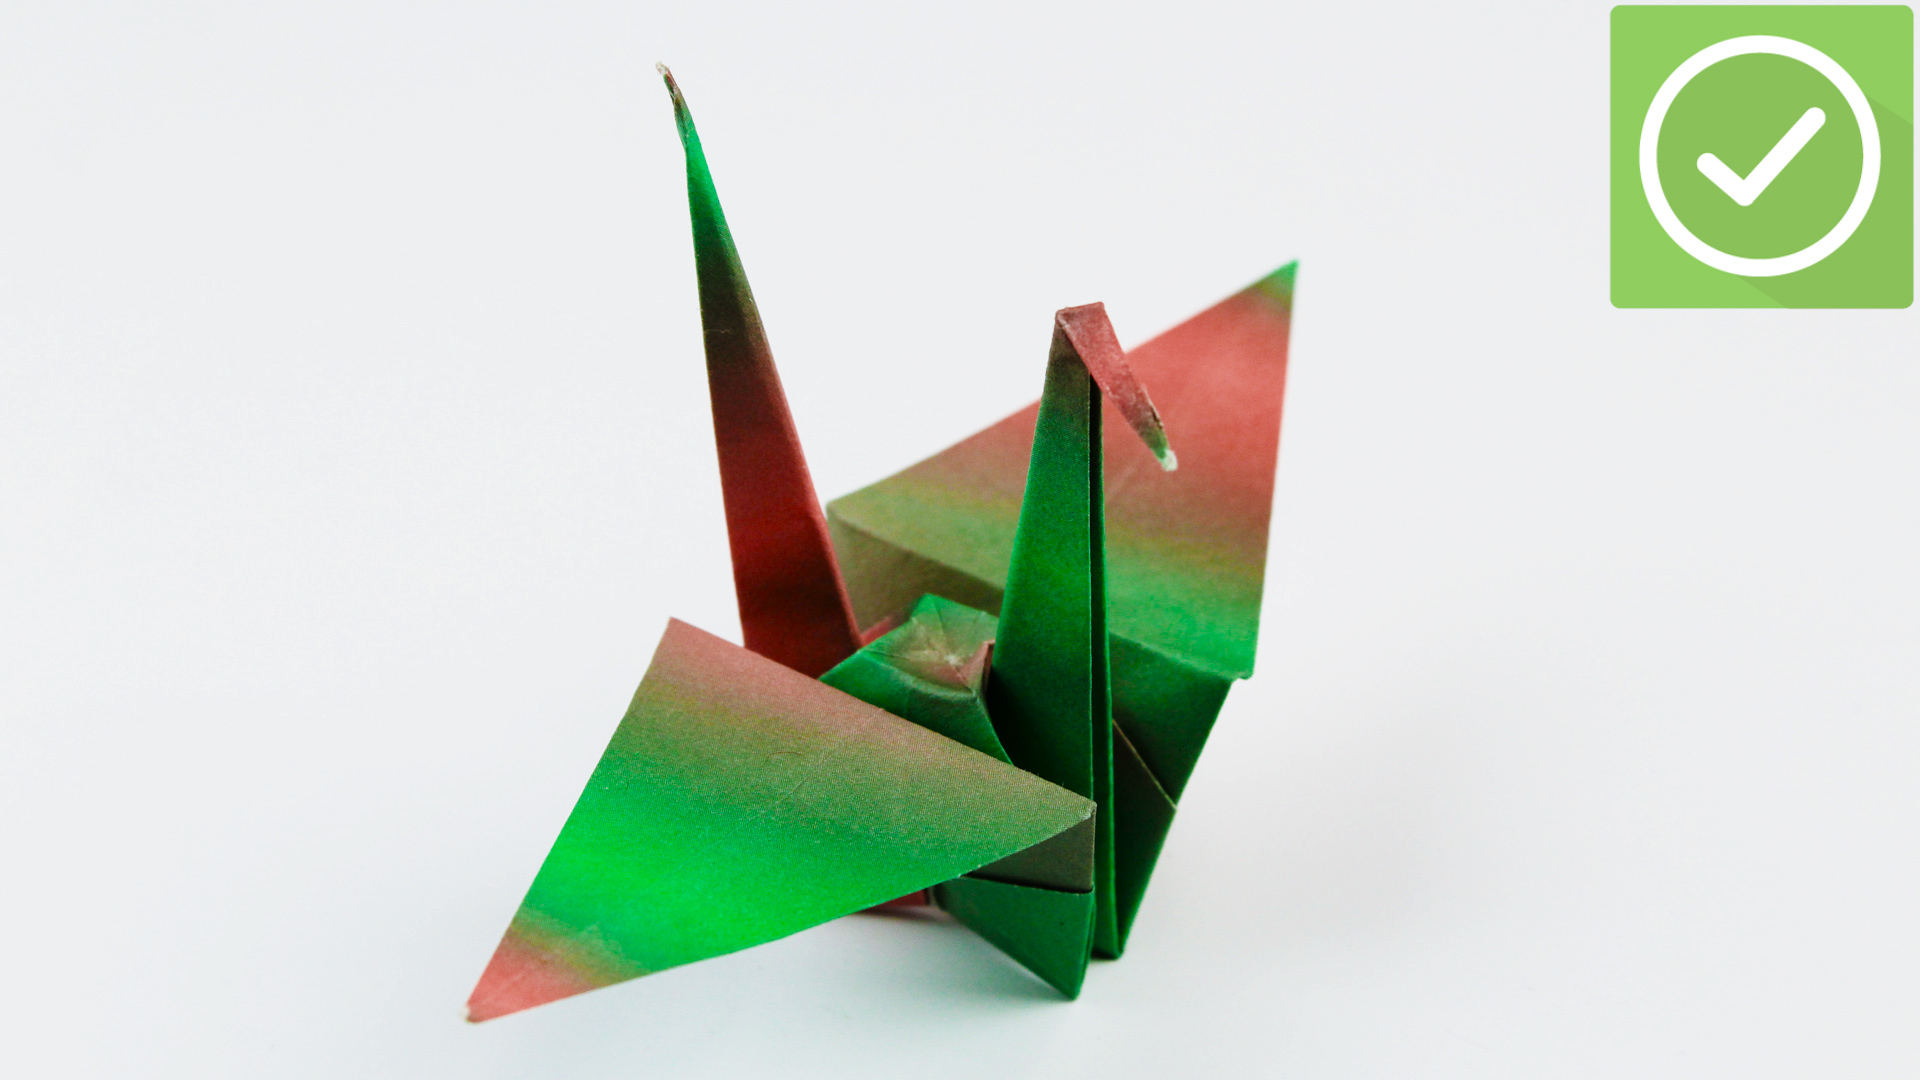 Flapping Bird Origami Instructions How To Fold A Paper Crane With Pictures Wikihow